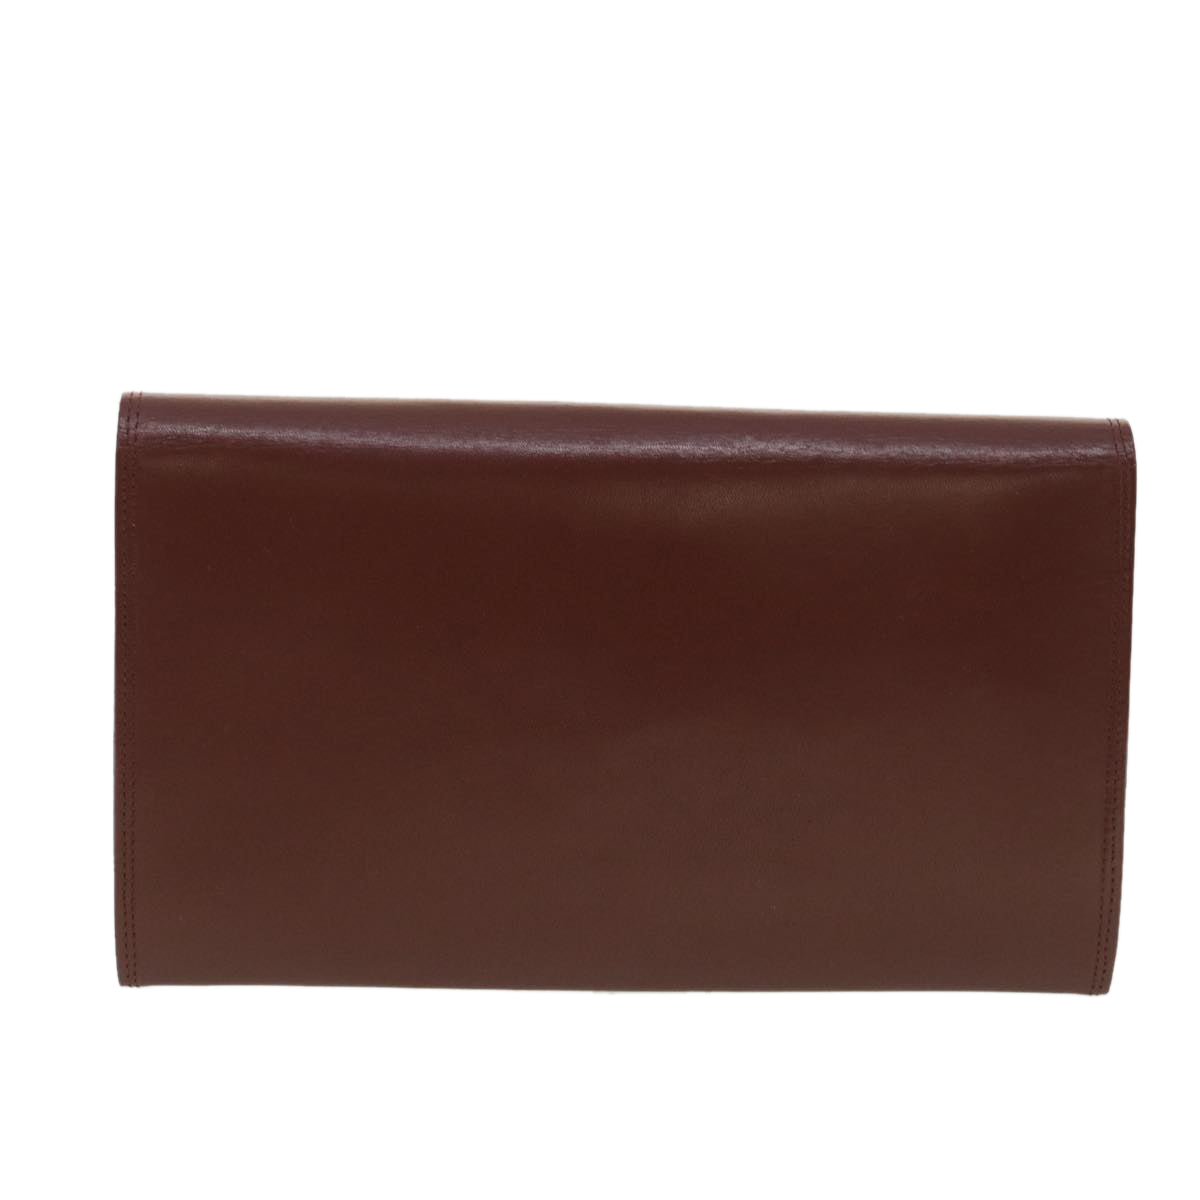 CARTIER Clutch Bag Leather Wine Red Auth 35722